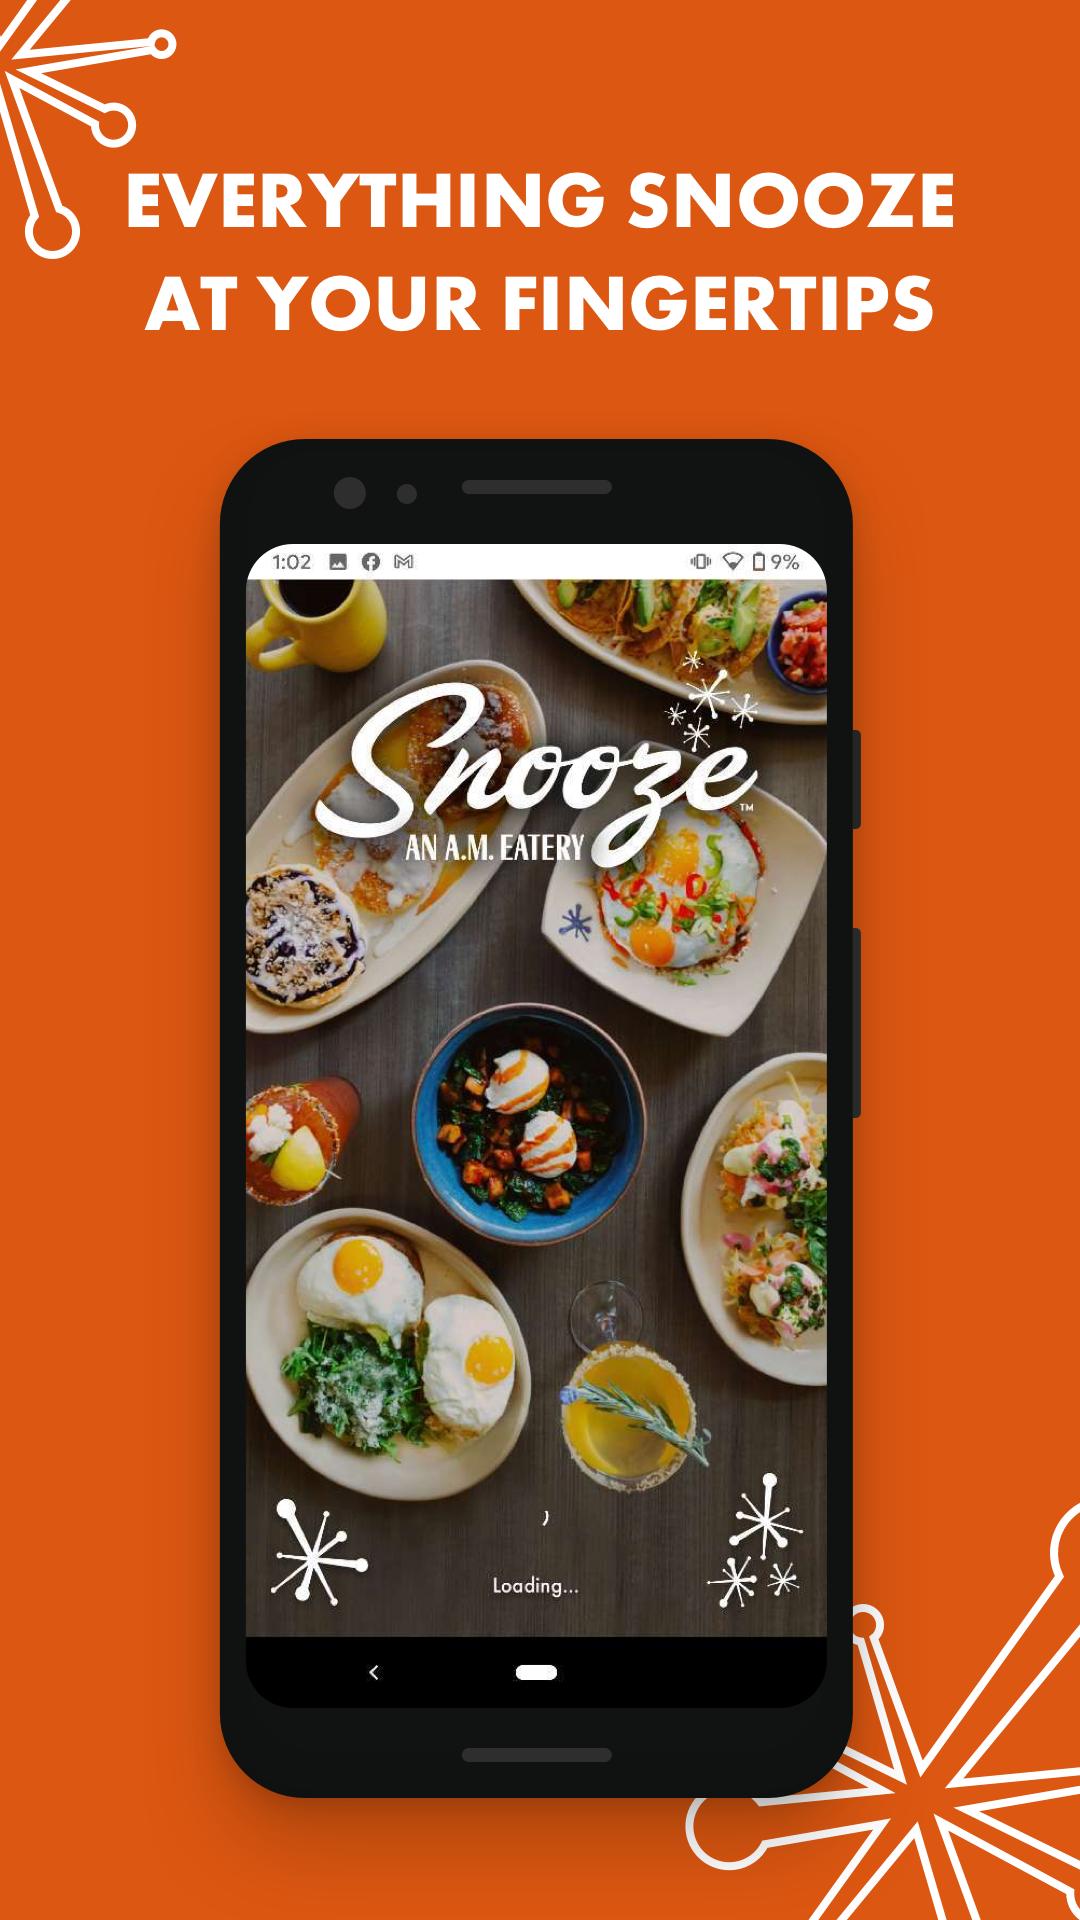 Snooze A.M. Eatery Mobile App Apk For Android Download